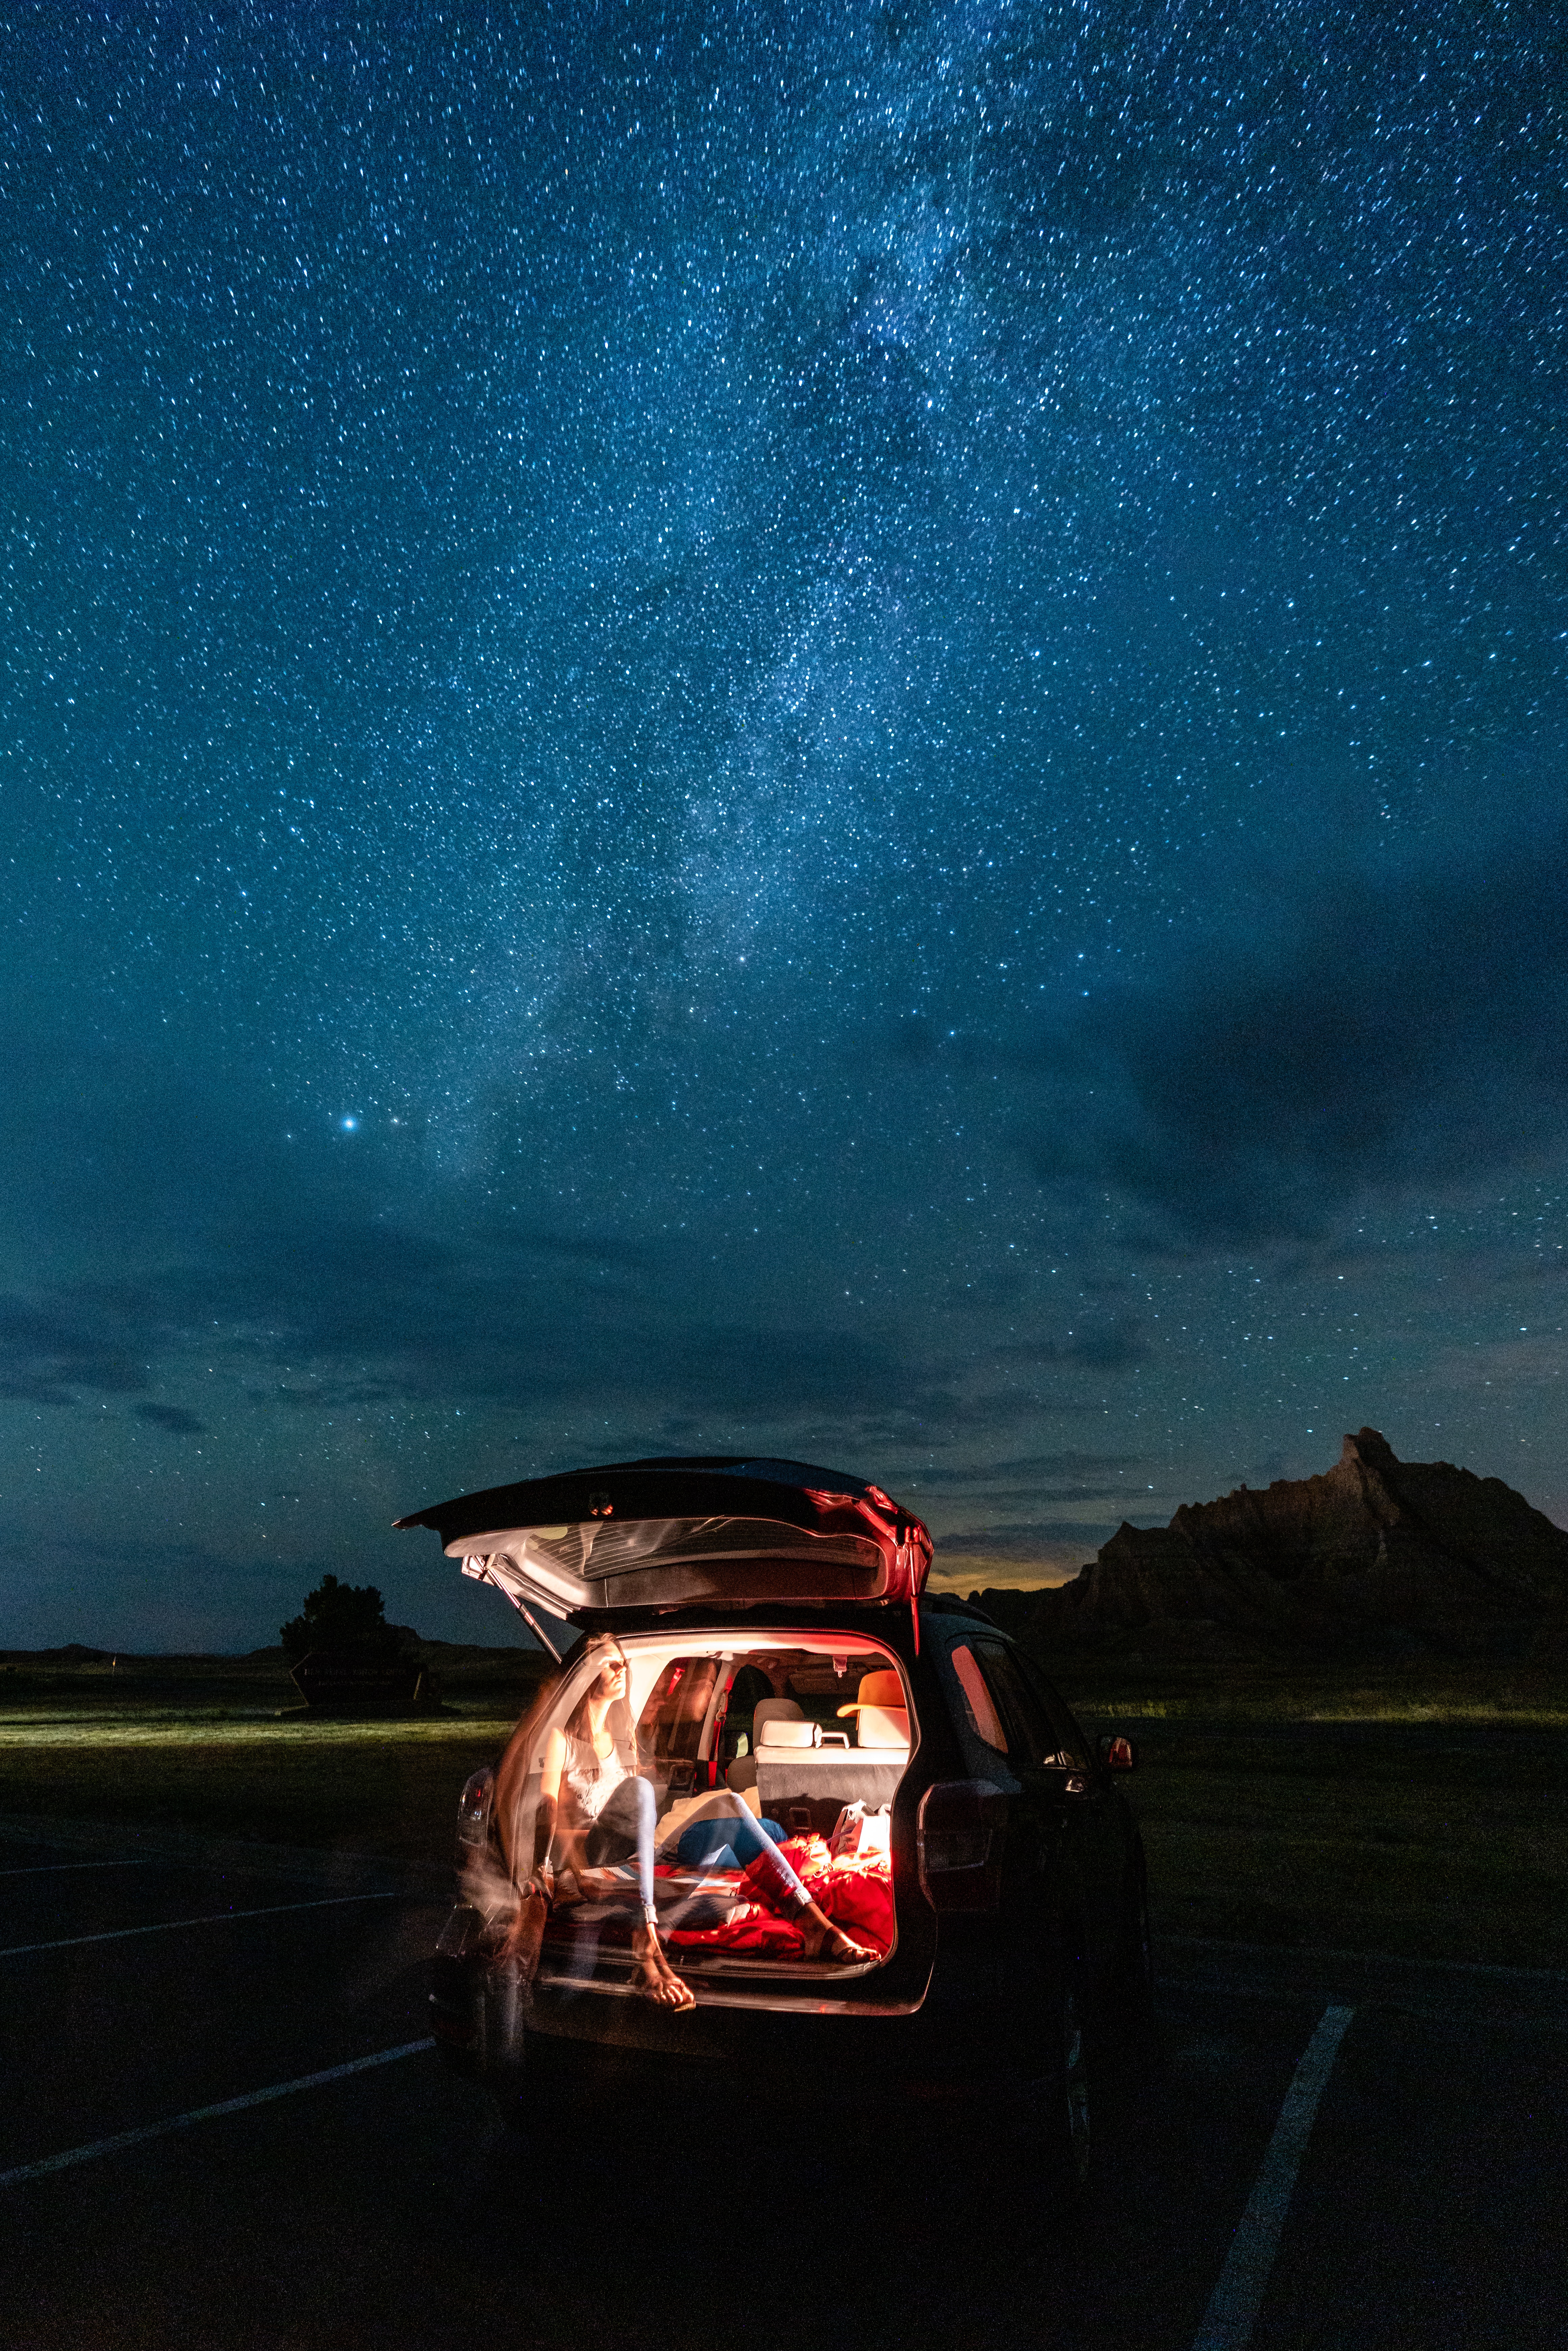 Person in the back of their car resting and looking out into the night sky filled with stars.